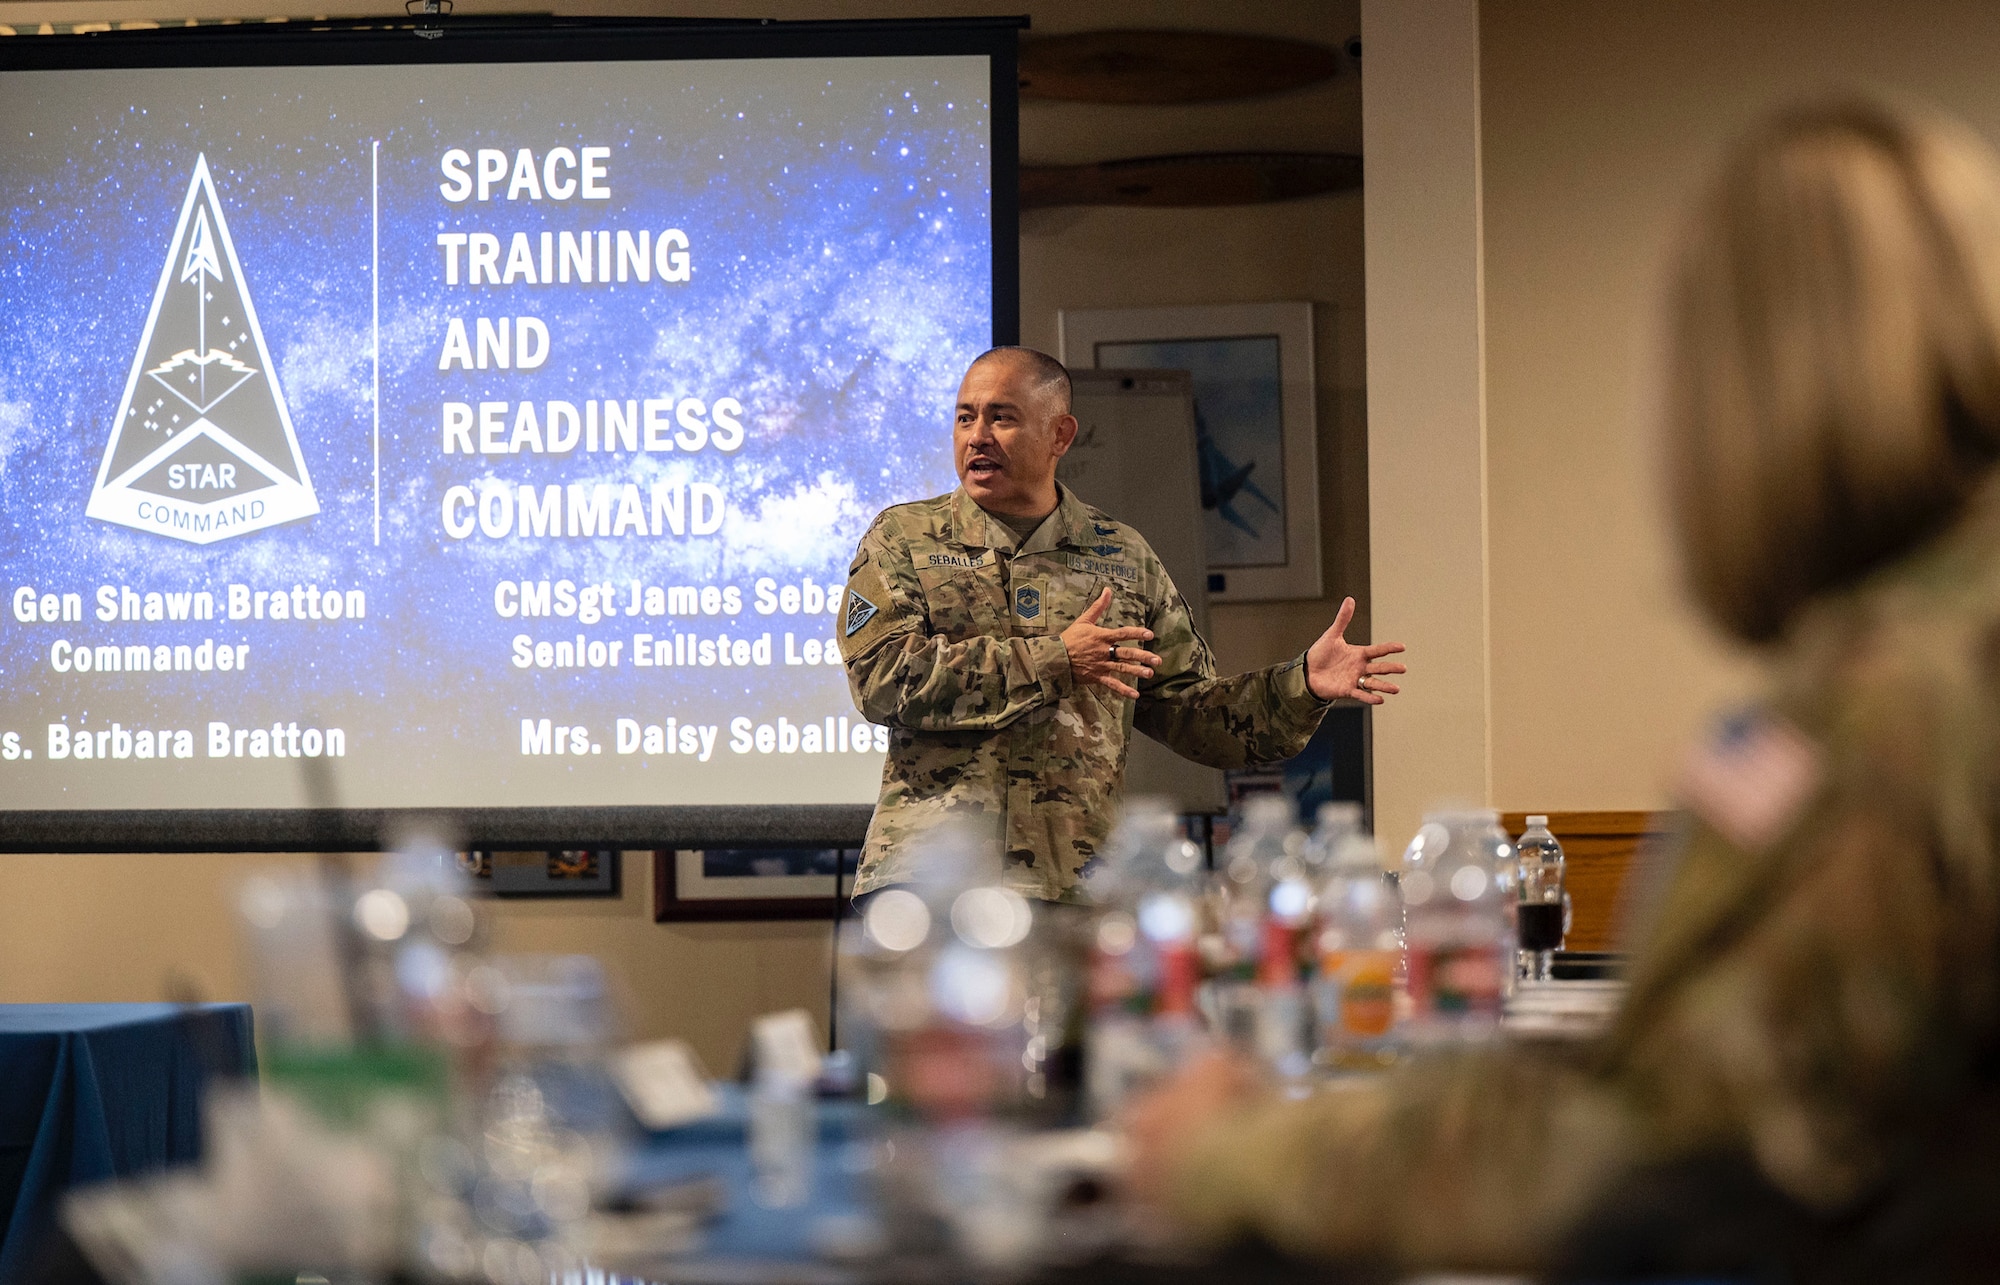 U.S. Space Force Chief Master Sgt. James Seballes, Space Training and Readiness Command senior enlisted leader, gives opening remarks to kickoff a conference at the U.S. Air Force Academy